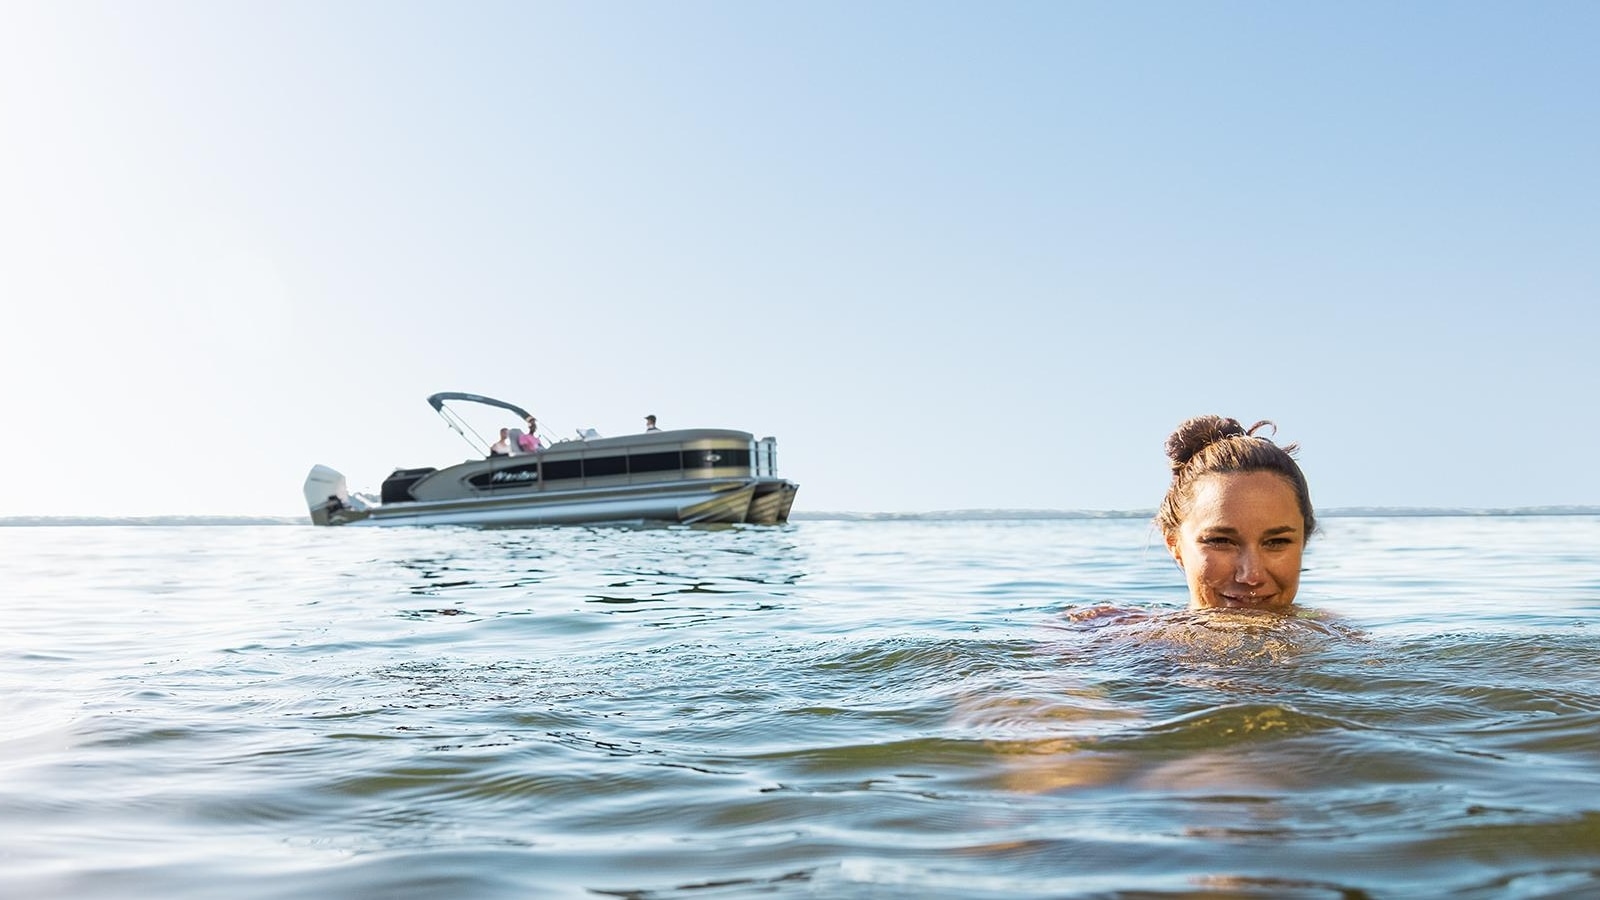 CAN A PONTOON BE USED IN THE OCEAN?